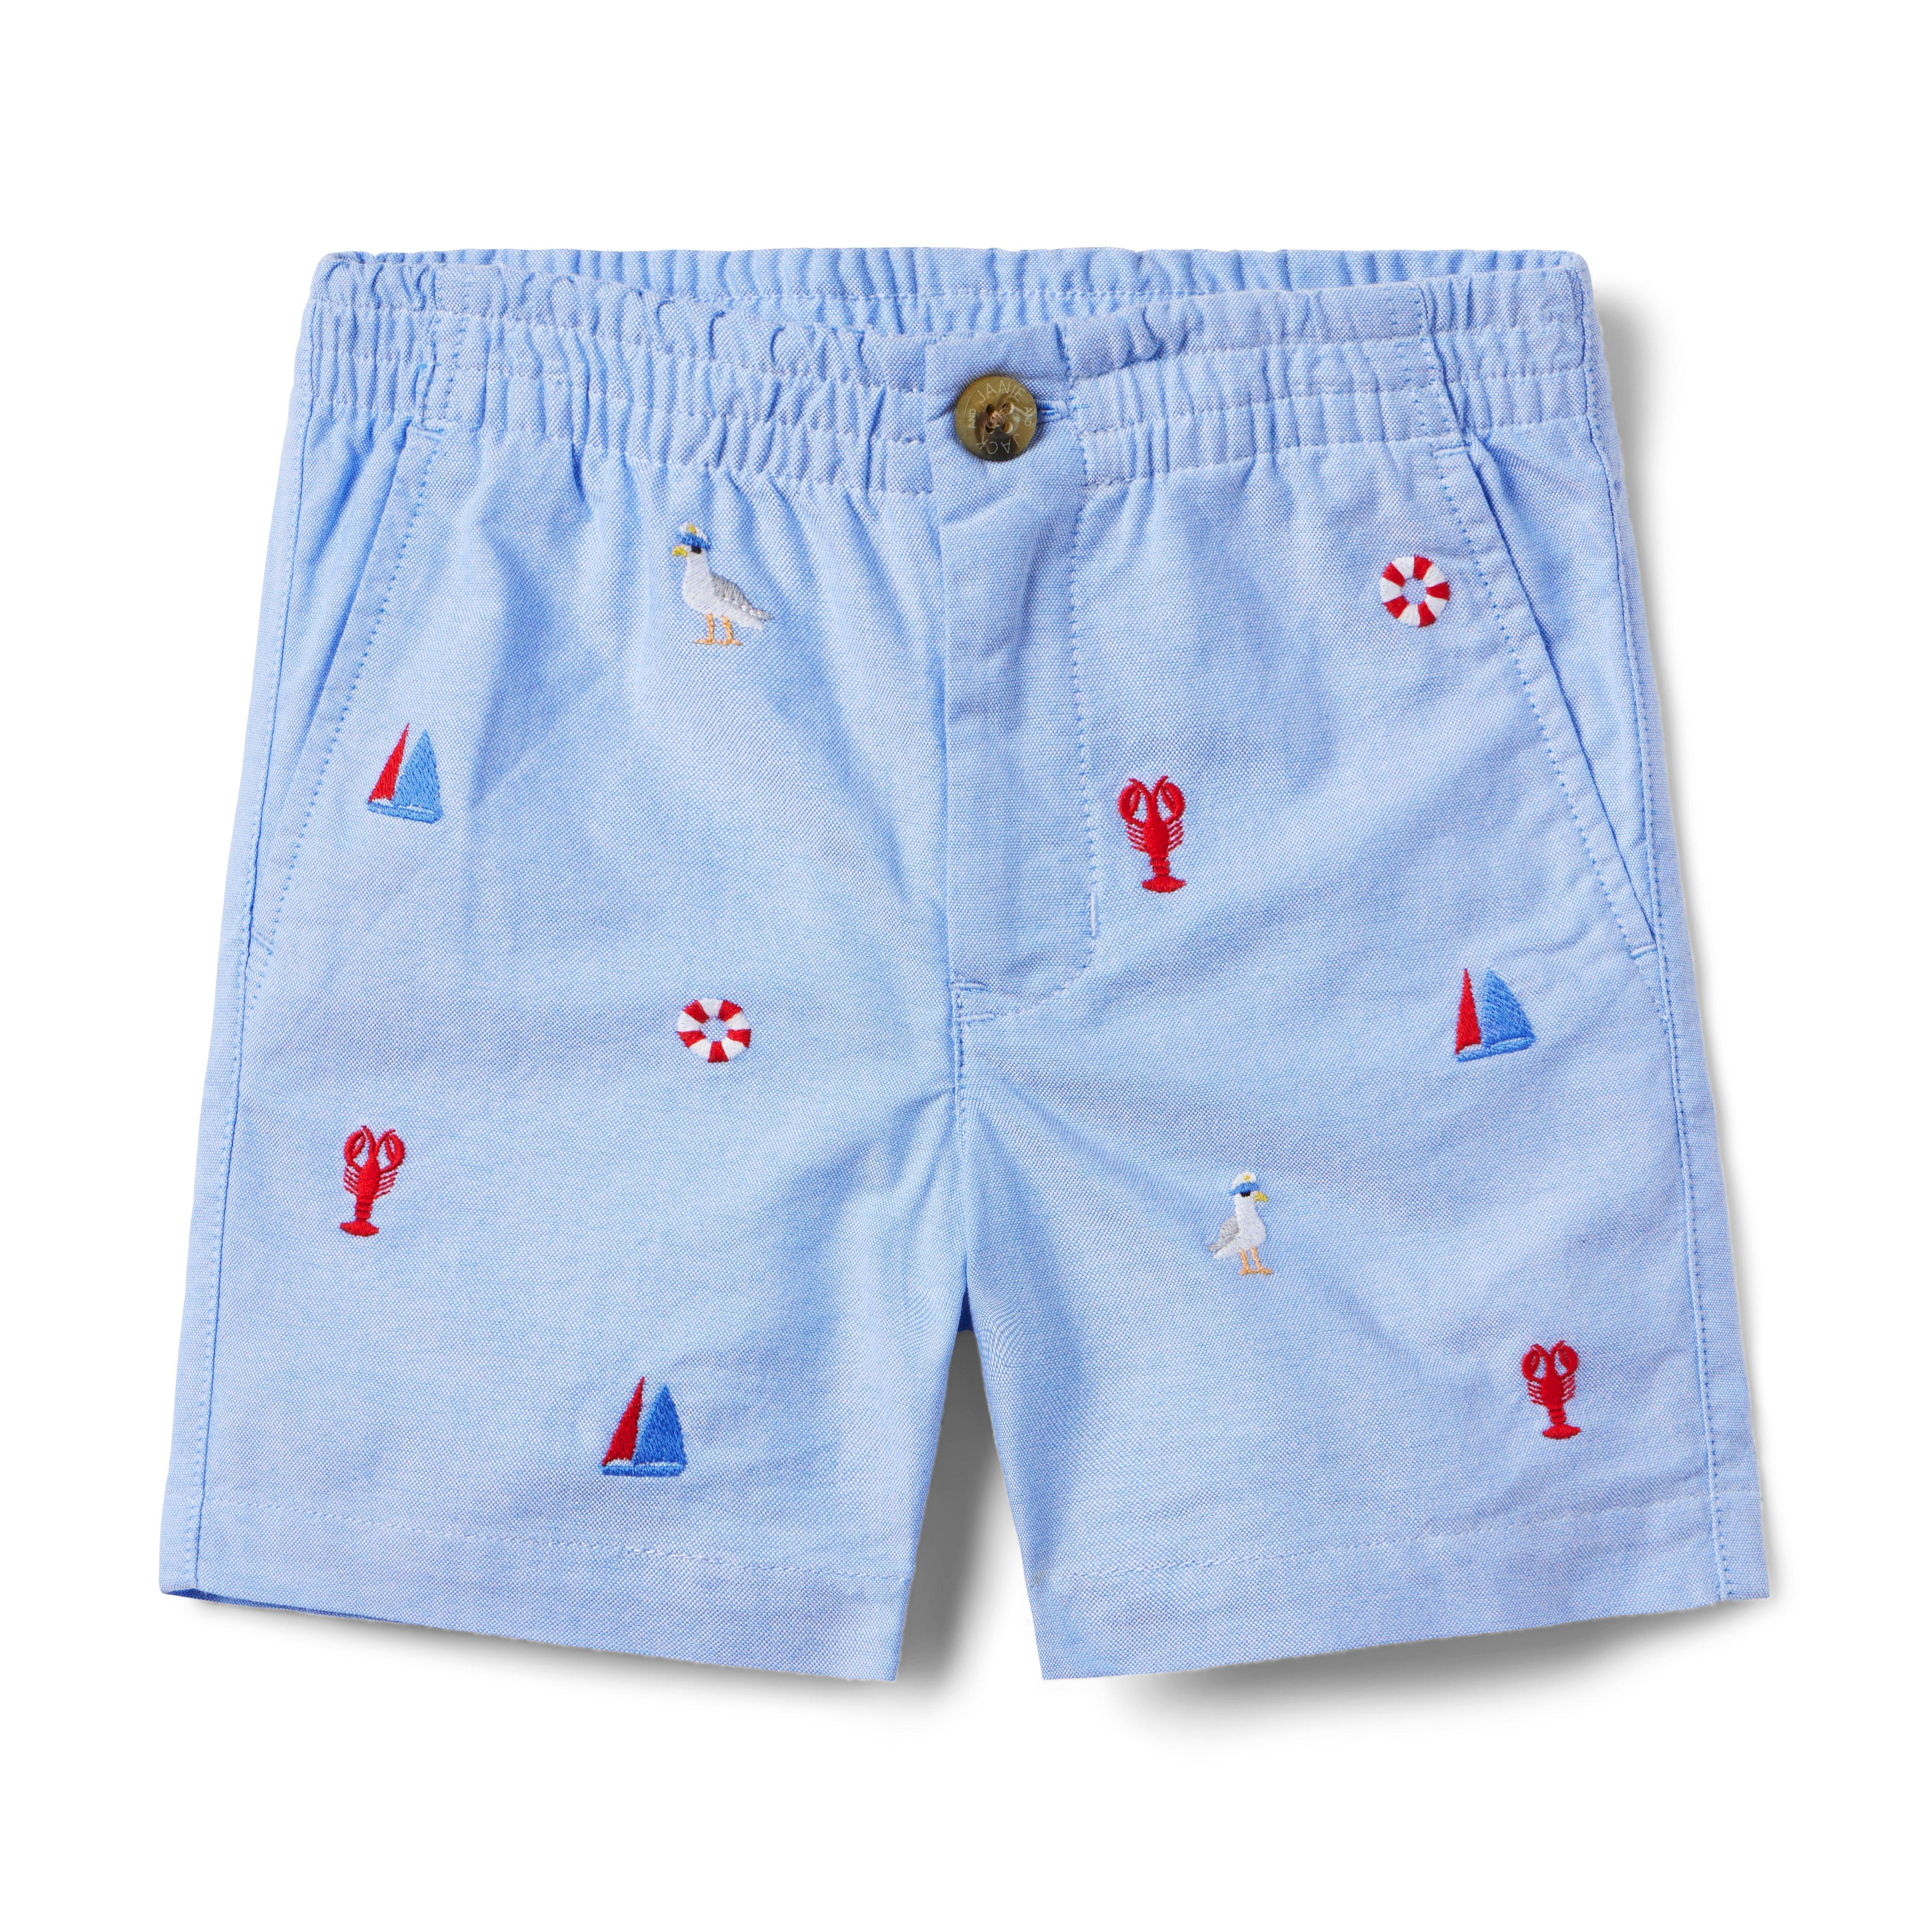 The Embroidered Oxford Pull-On Short